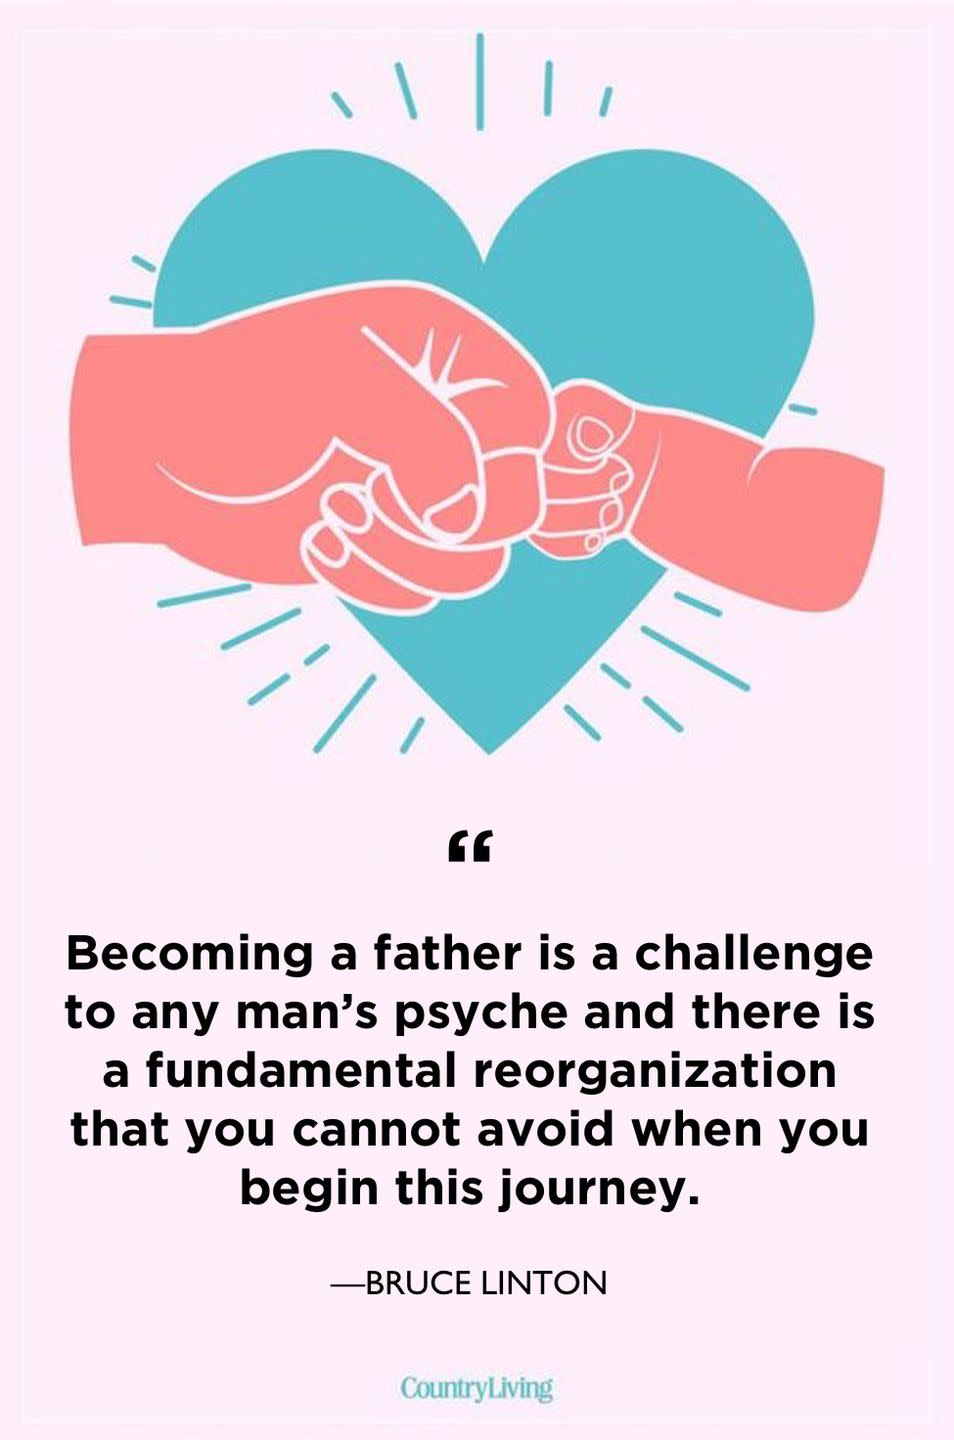 <p>"Becoming a father is a challenge to any man's psyche and there is a fundamental reorganization that you cannot avoid when you begin this journey."</p>